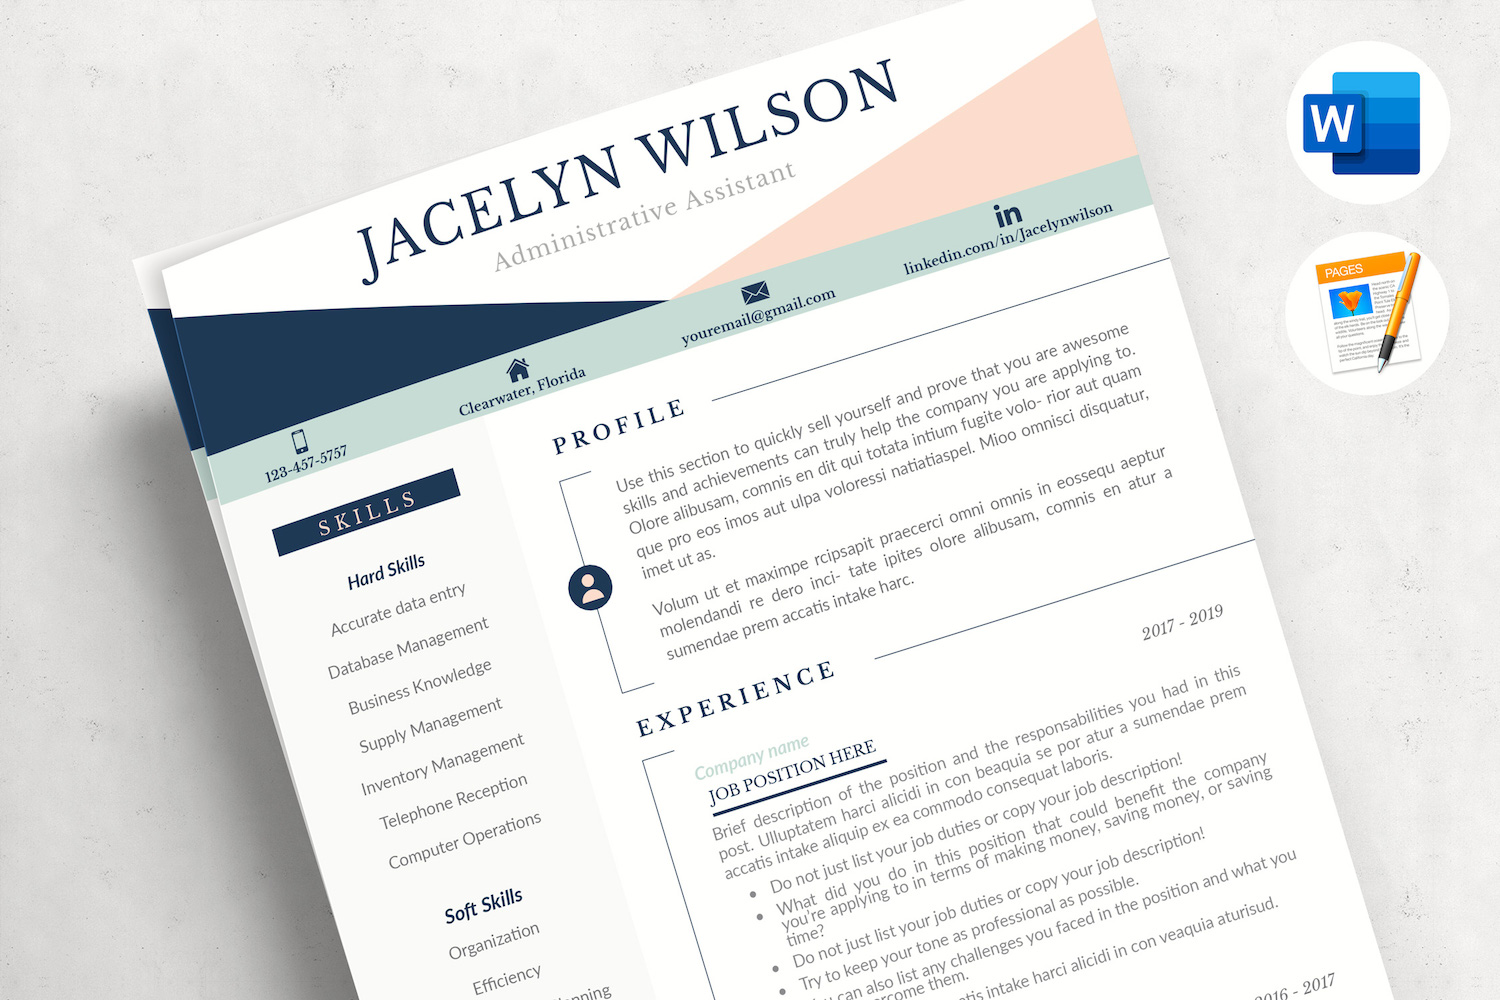 JACELYN - Professional Resume for Administrative Assistant and Matching Cover Letter